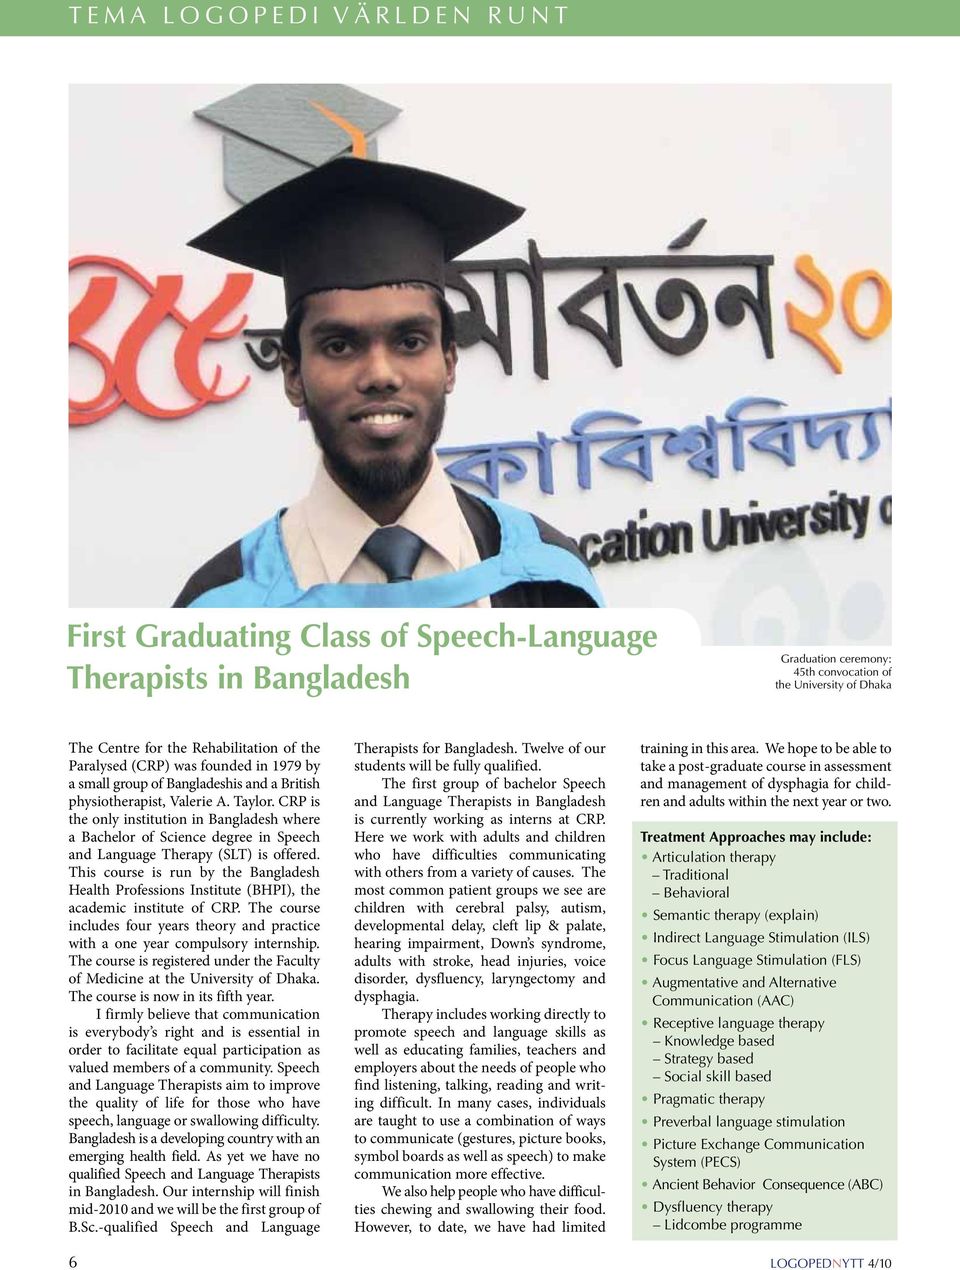 CRP is the only institution in Bangladesh where a Bachelor of Science degree in Speech and Language Therapy (SLT) is offered.